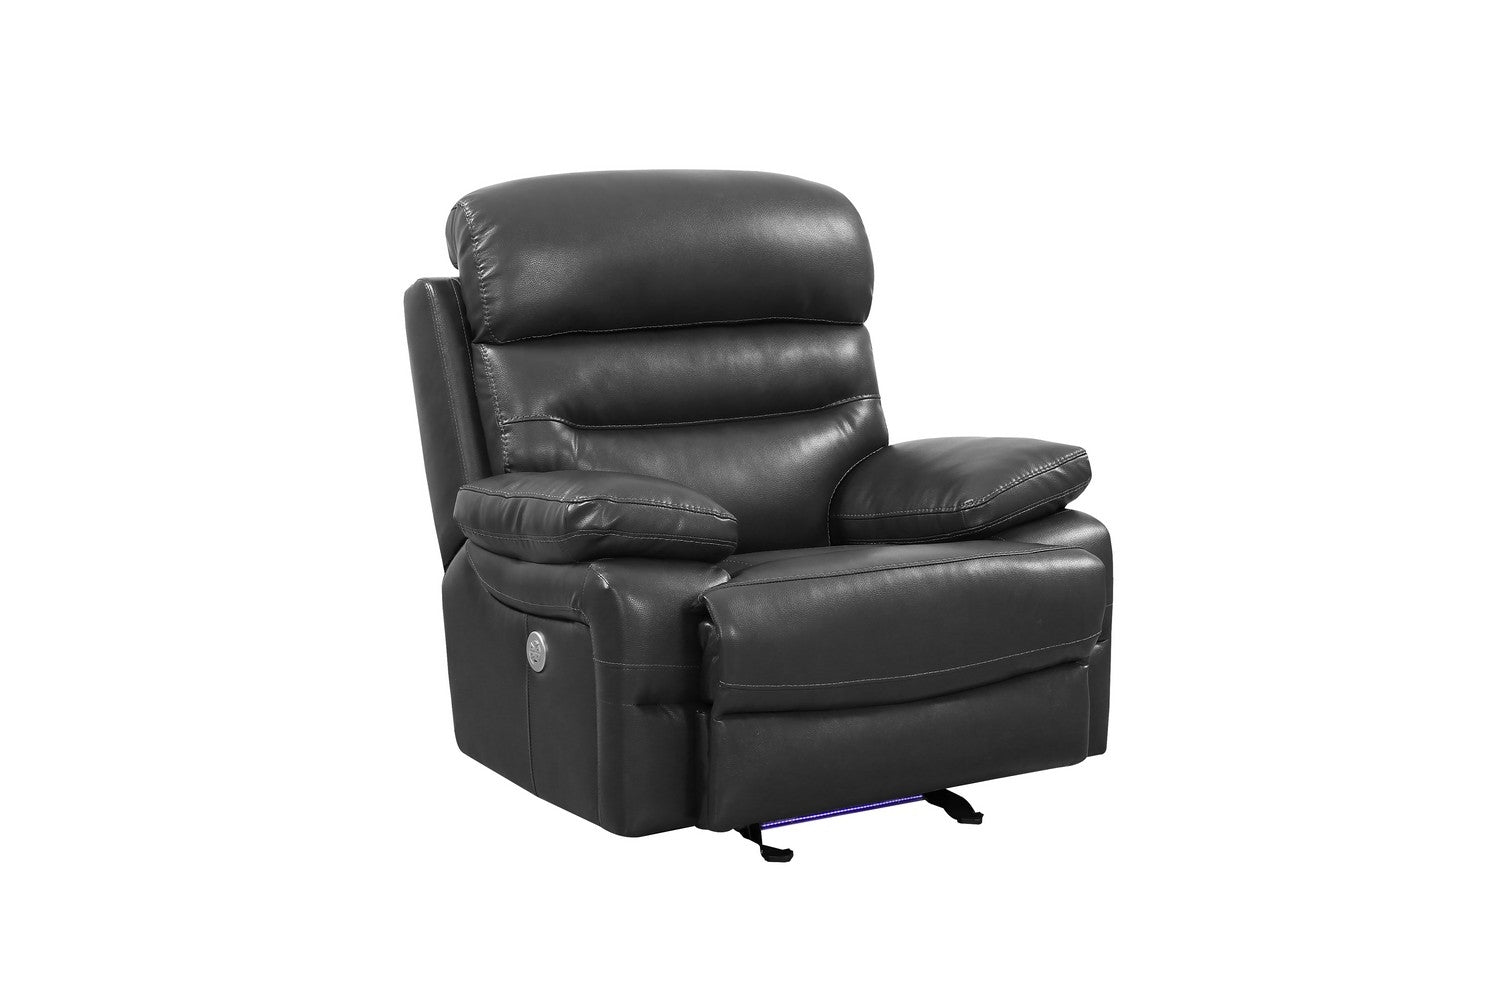 43" Grey Faux Leather Power Recliner Chair